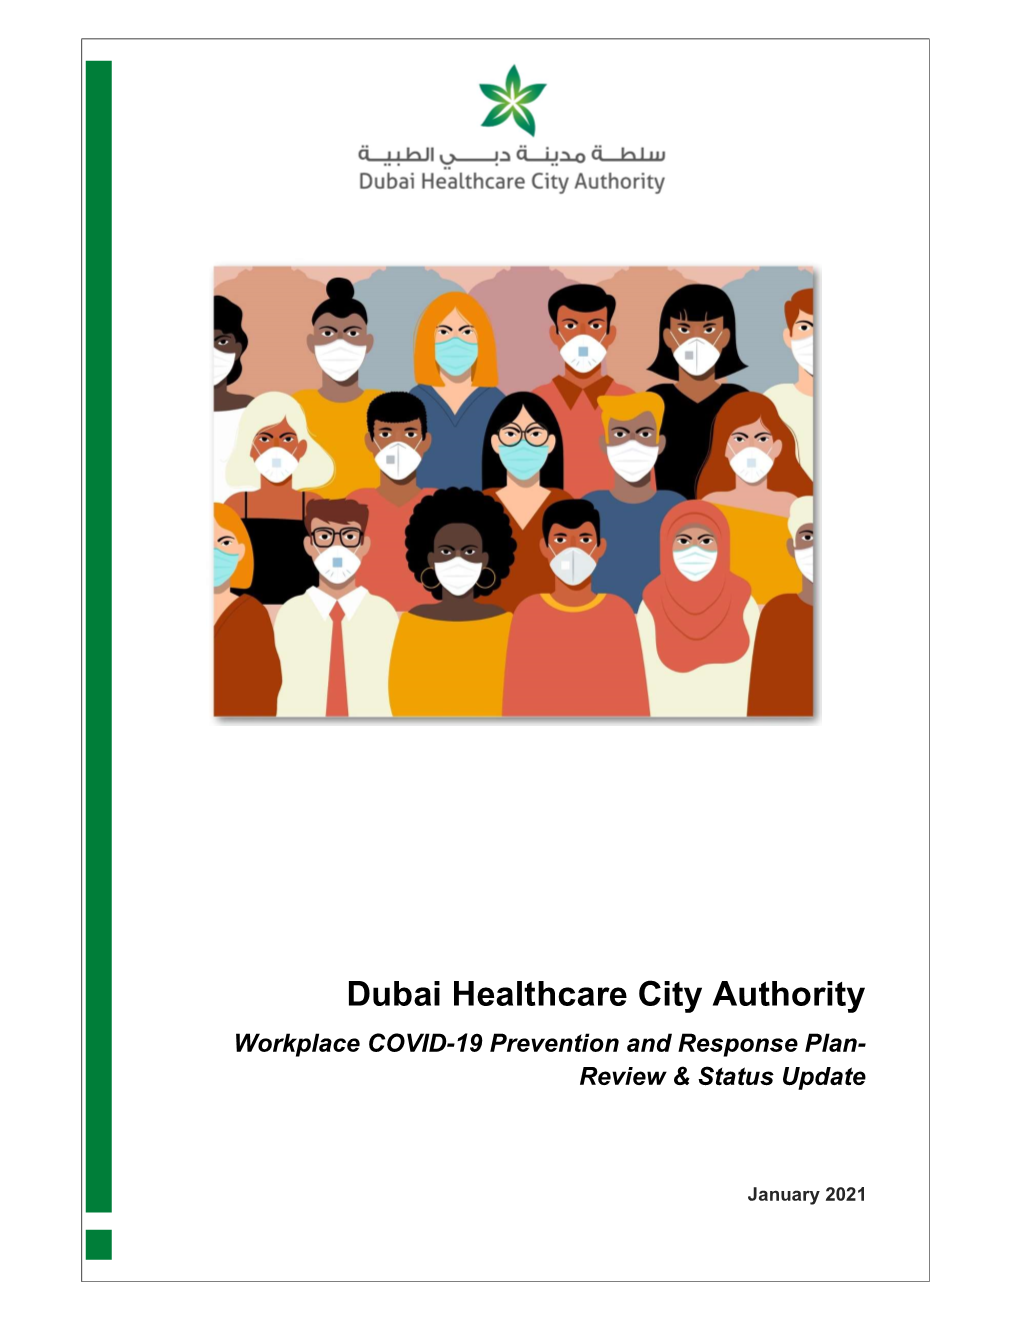 DHCA HSE COVID Prevention Response Plan